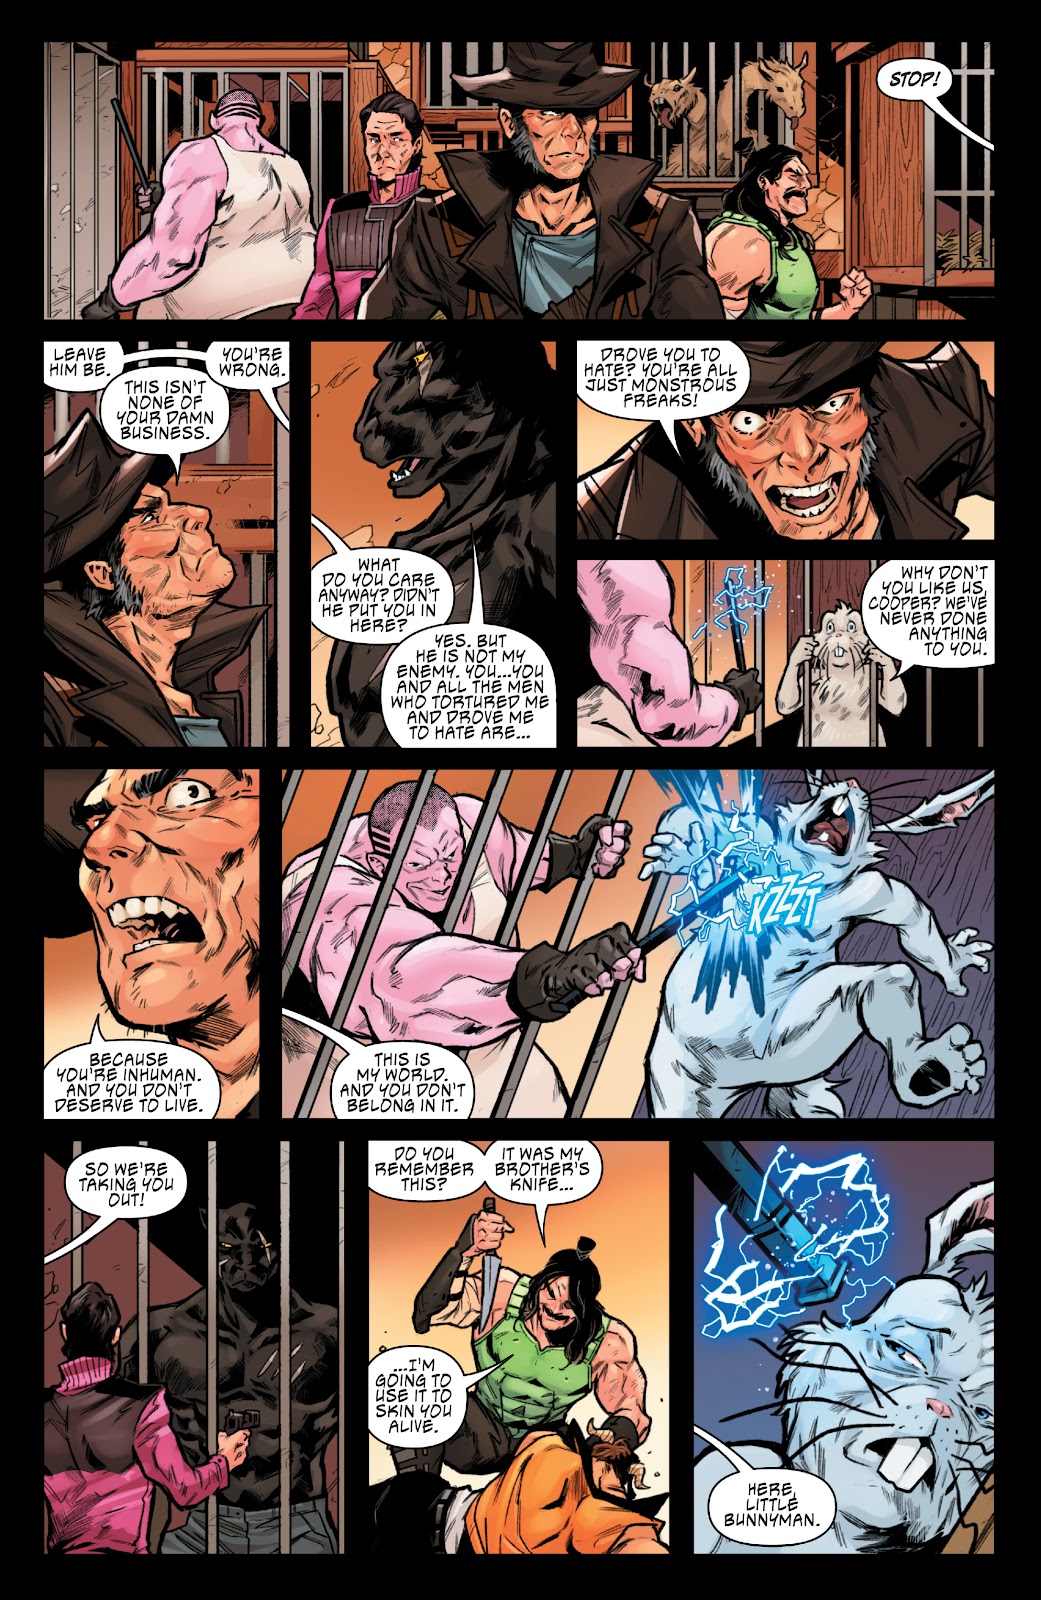 Man Goat & The Bunny Man issue 2023 Spring Special - Page 31